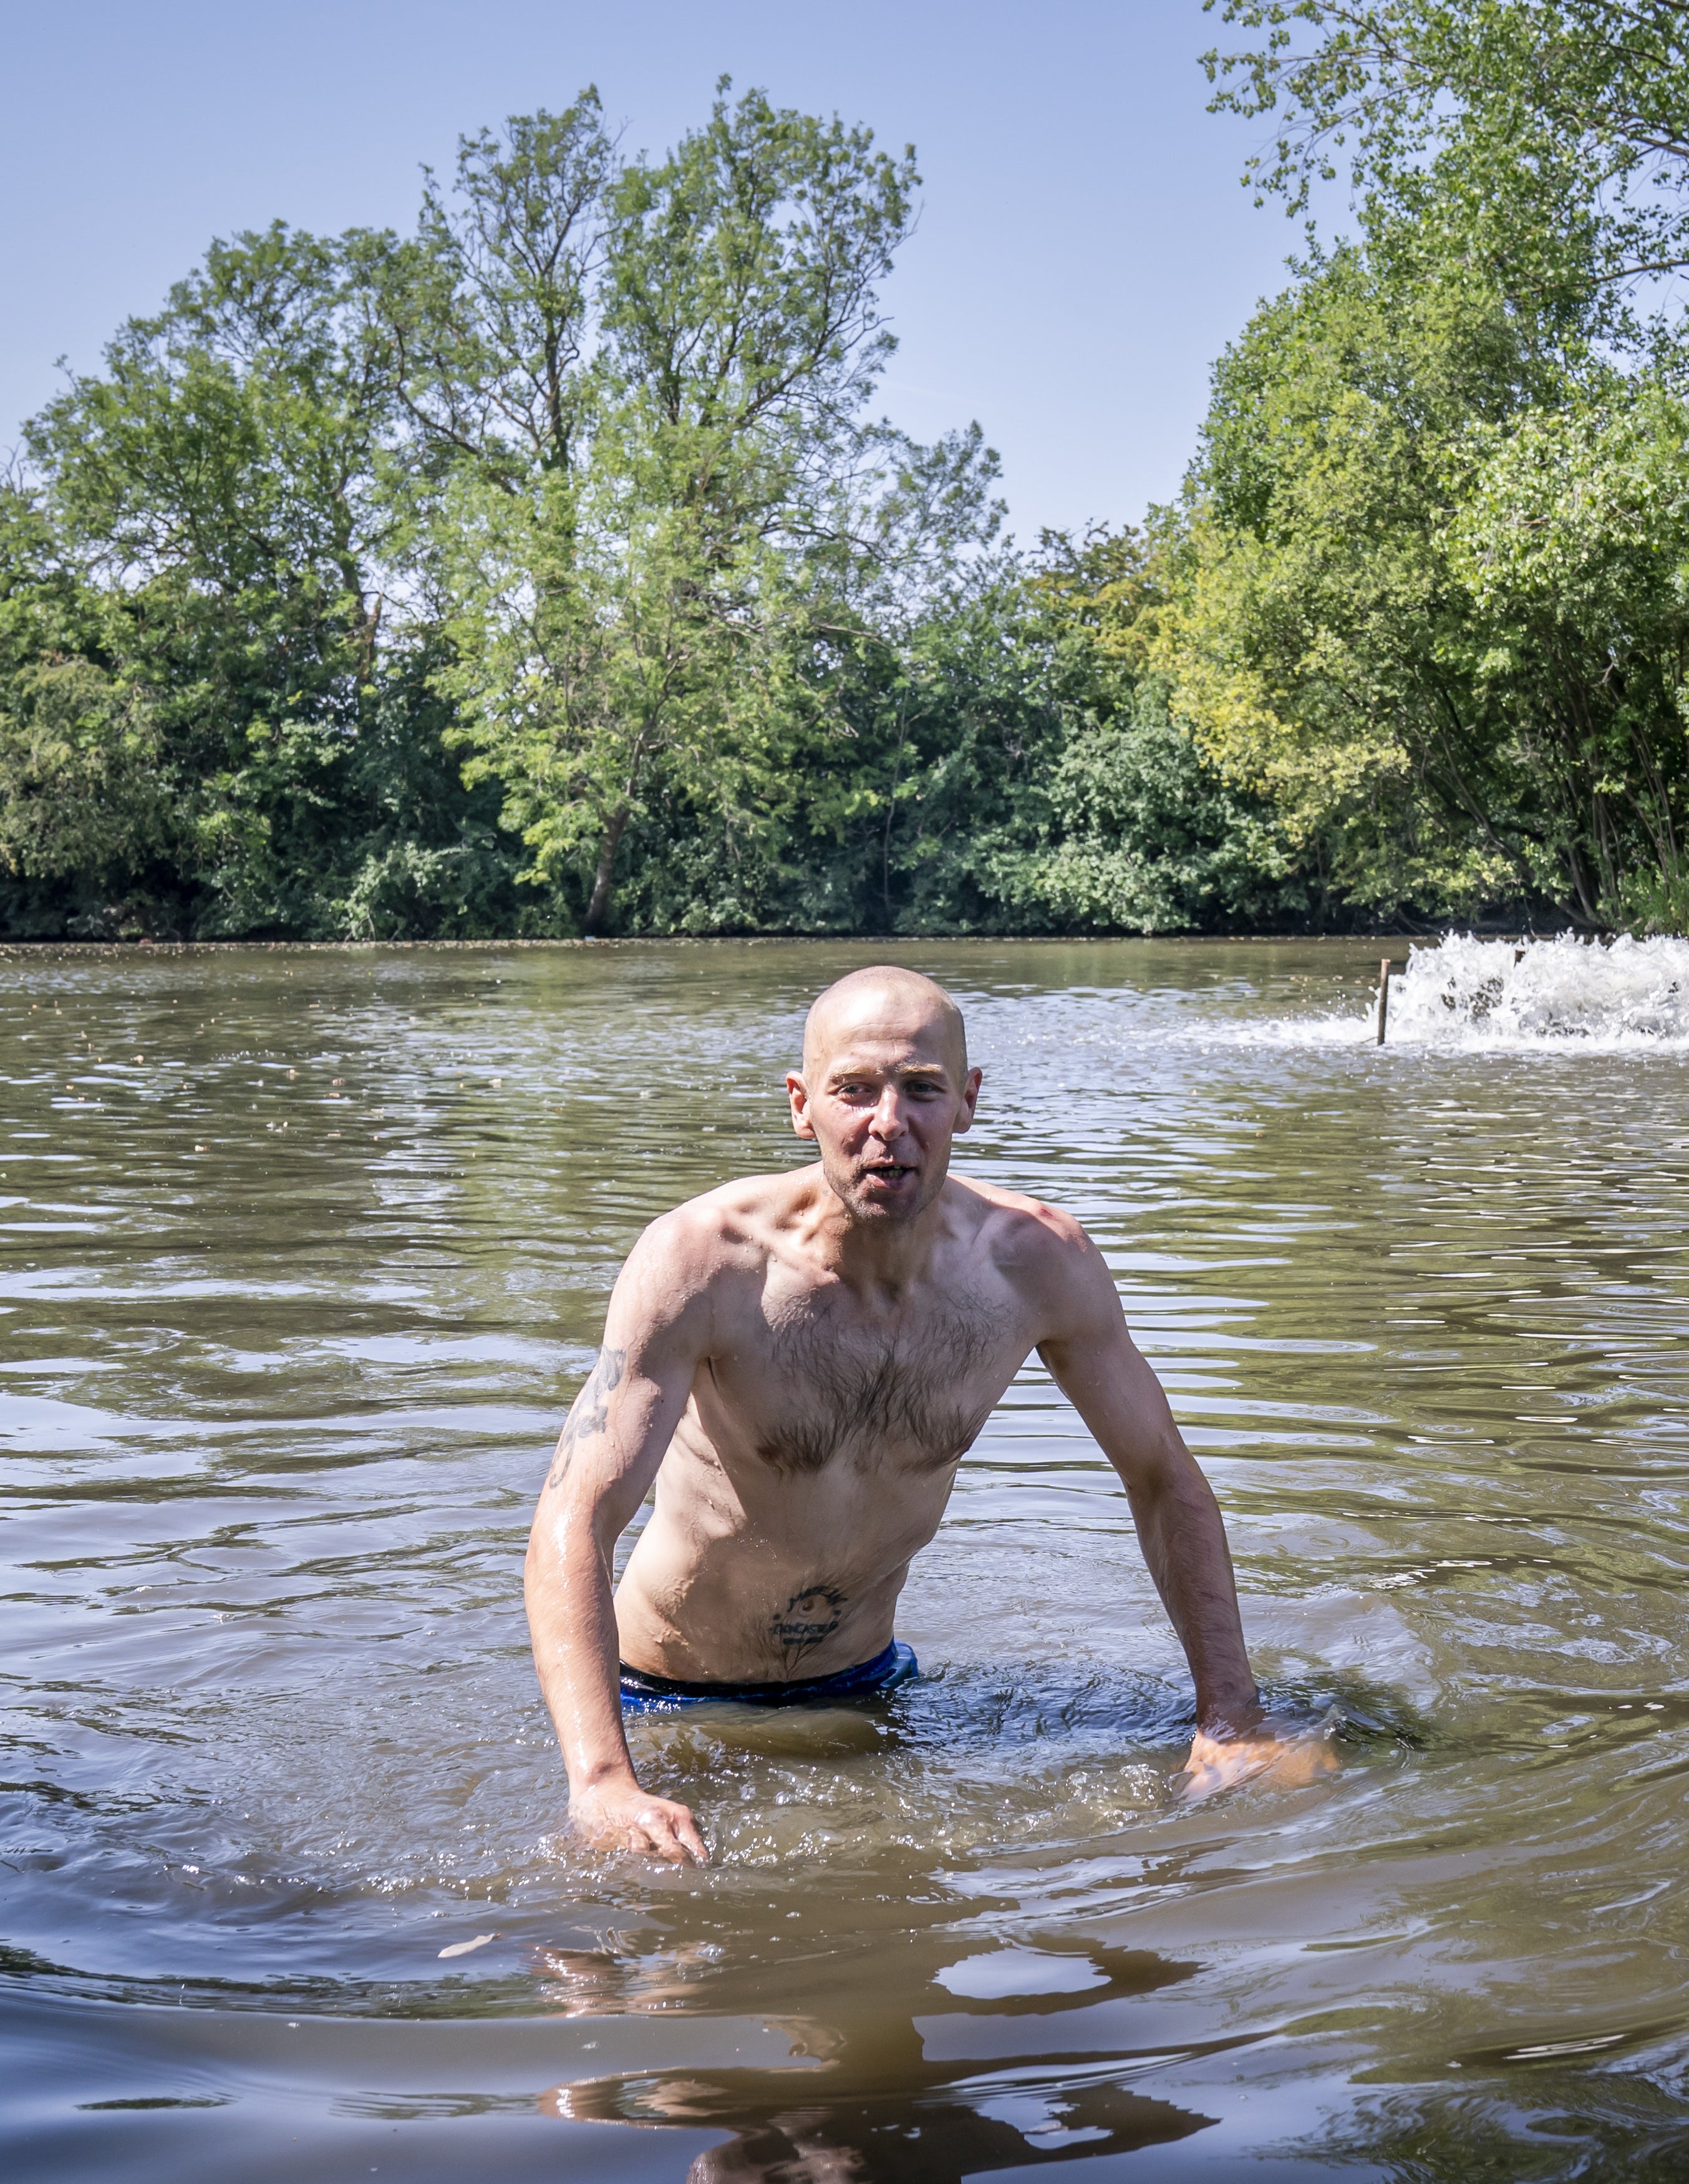 A man swims in a lake in Sandall Park, Doncaster (Danny Lawson/PA)